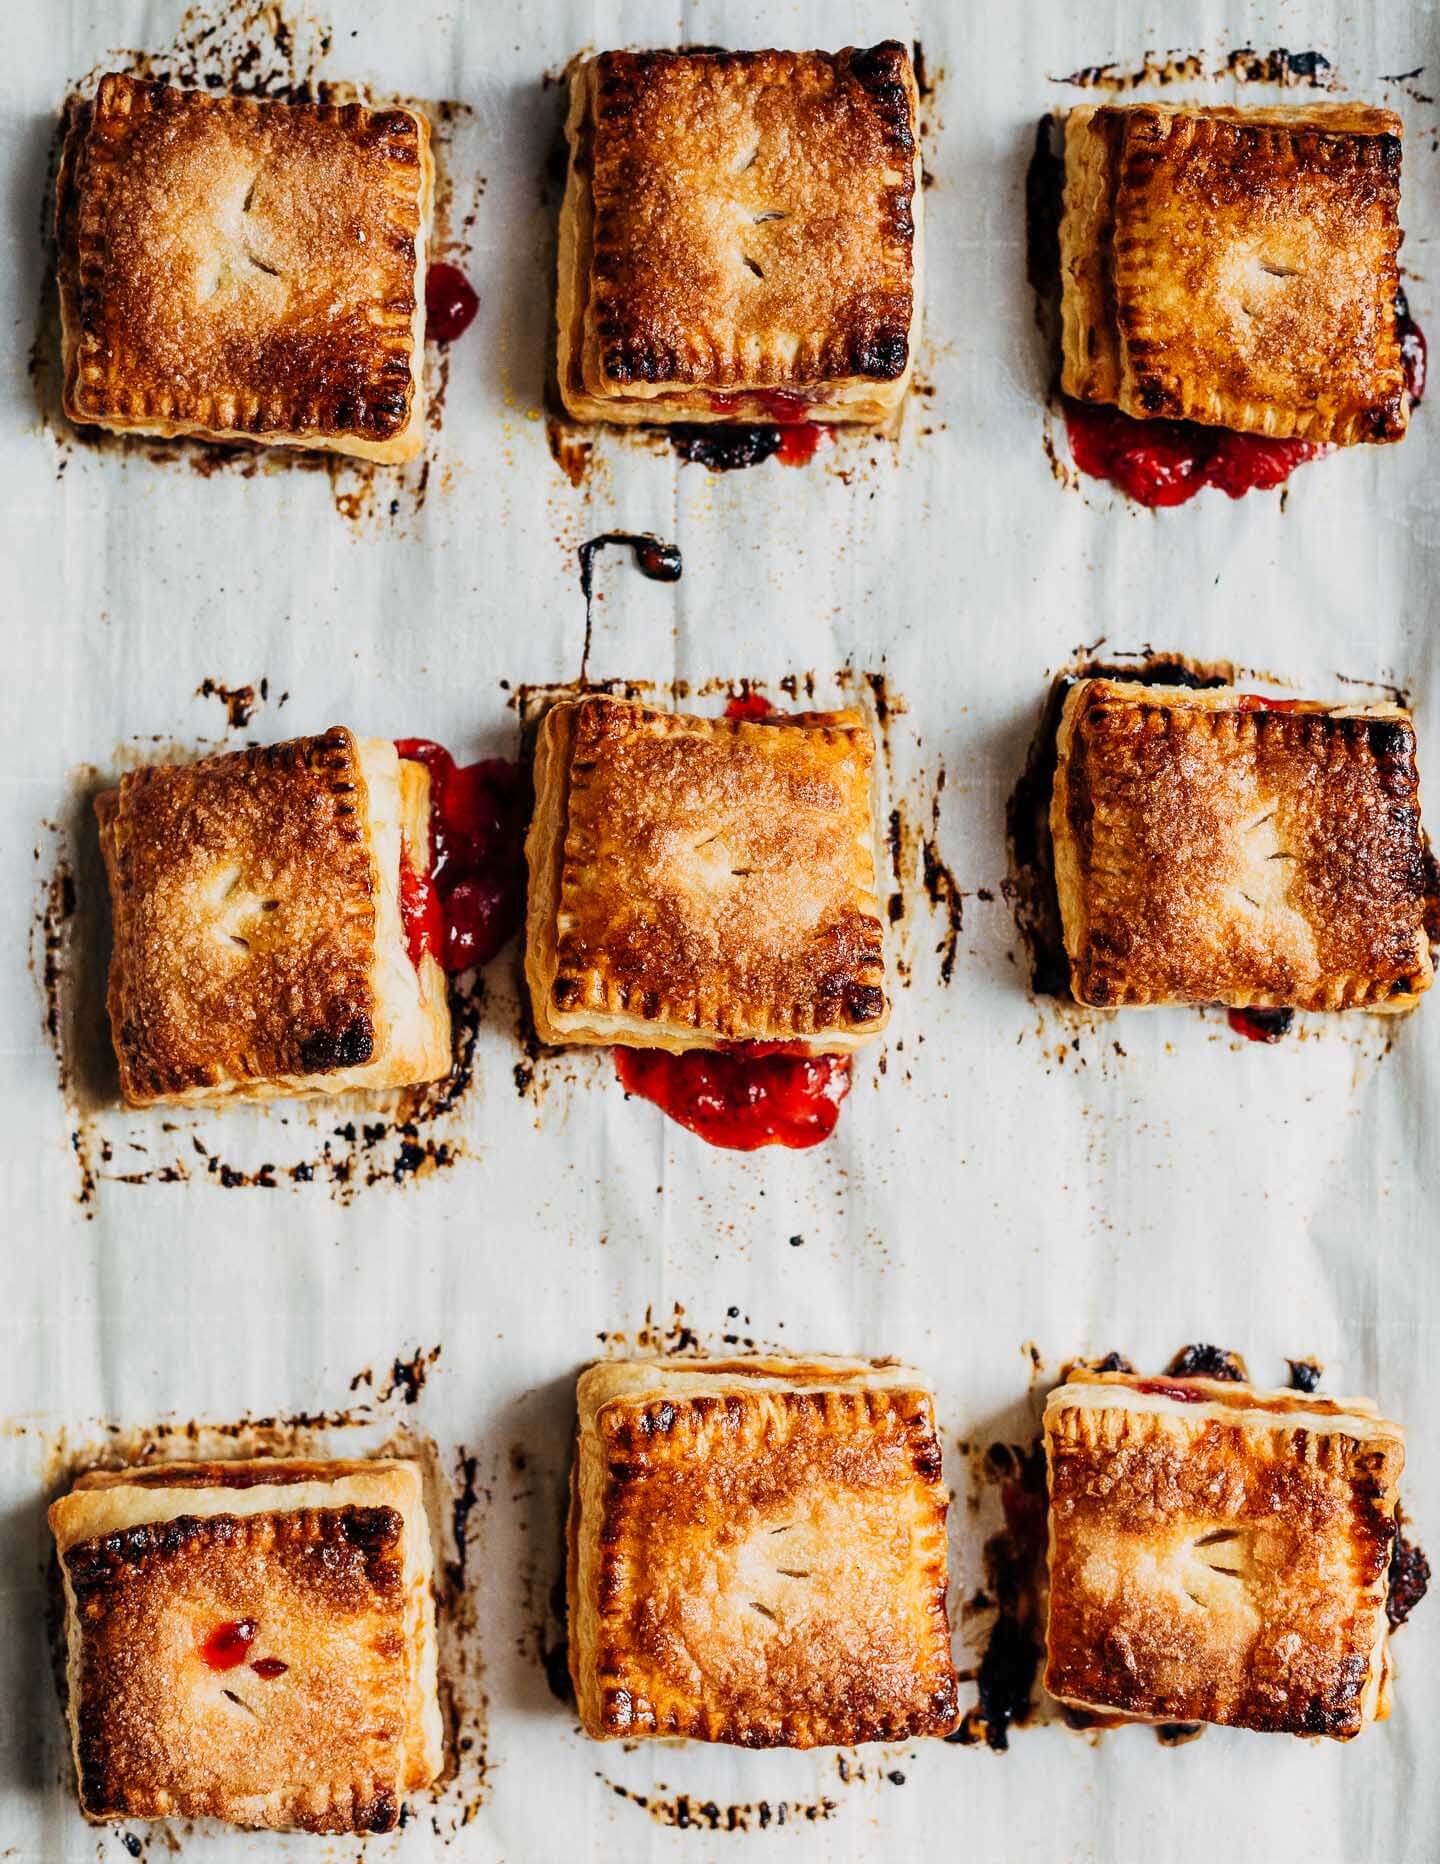 These lofty strawberry hand pies feature a jammy strawberry filling with notes of fresh basil and black pepper surrounded by buttery, impossibly flaky pastry. They're the perfect treat for spring gatherings and picnics.